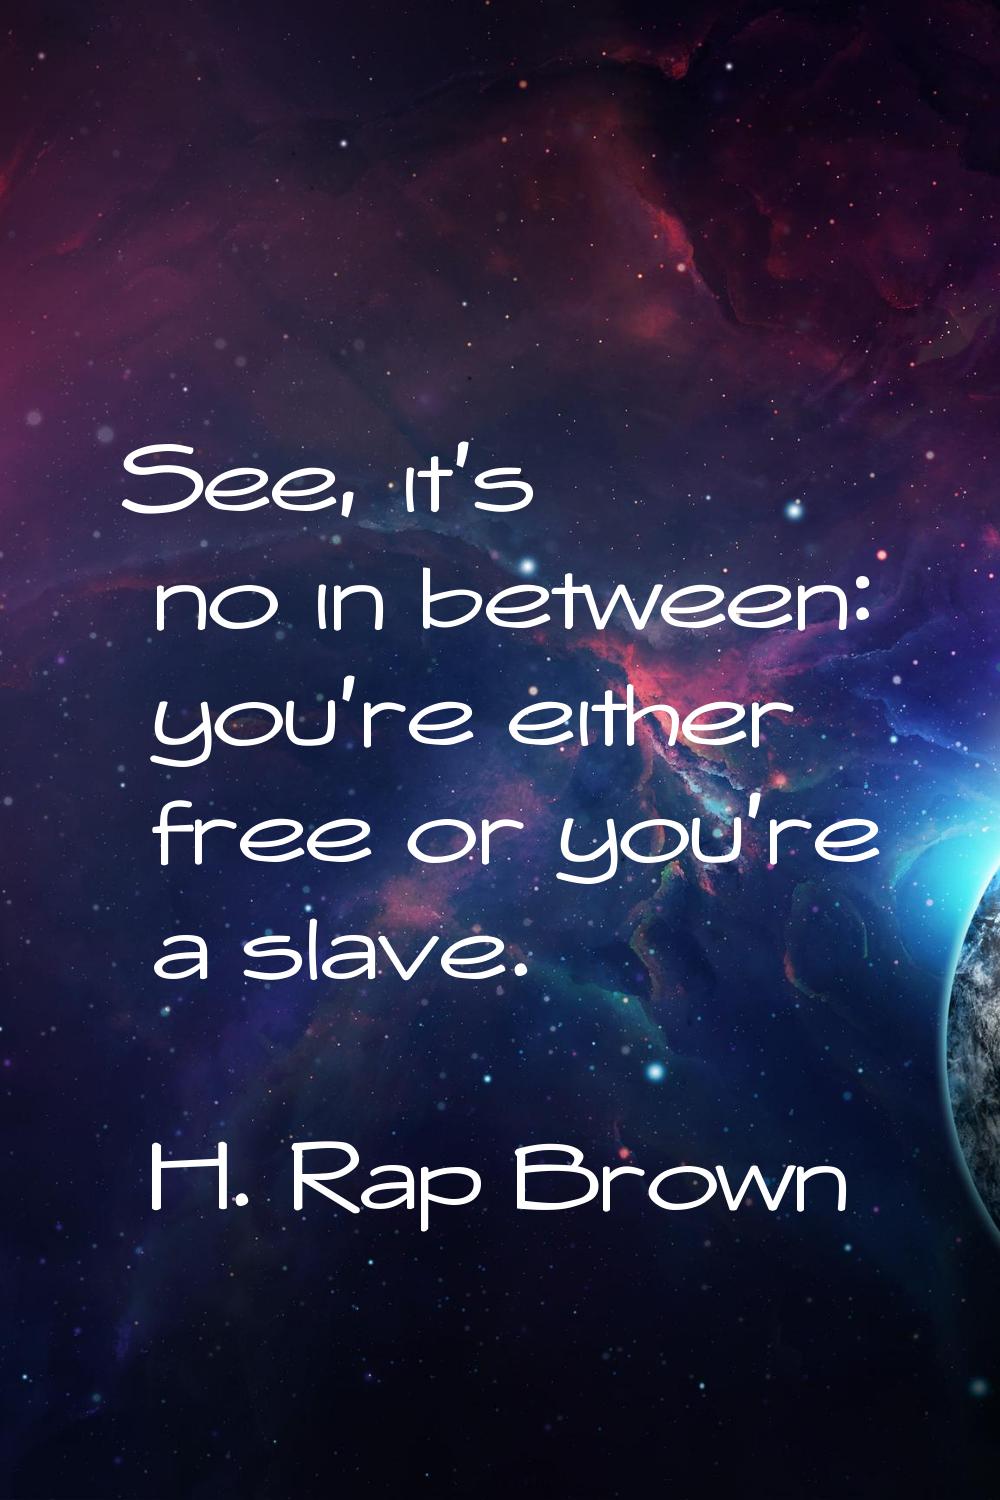 See, it's no in between: you're either free or you're a slave.